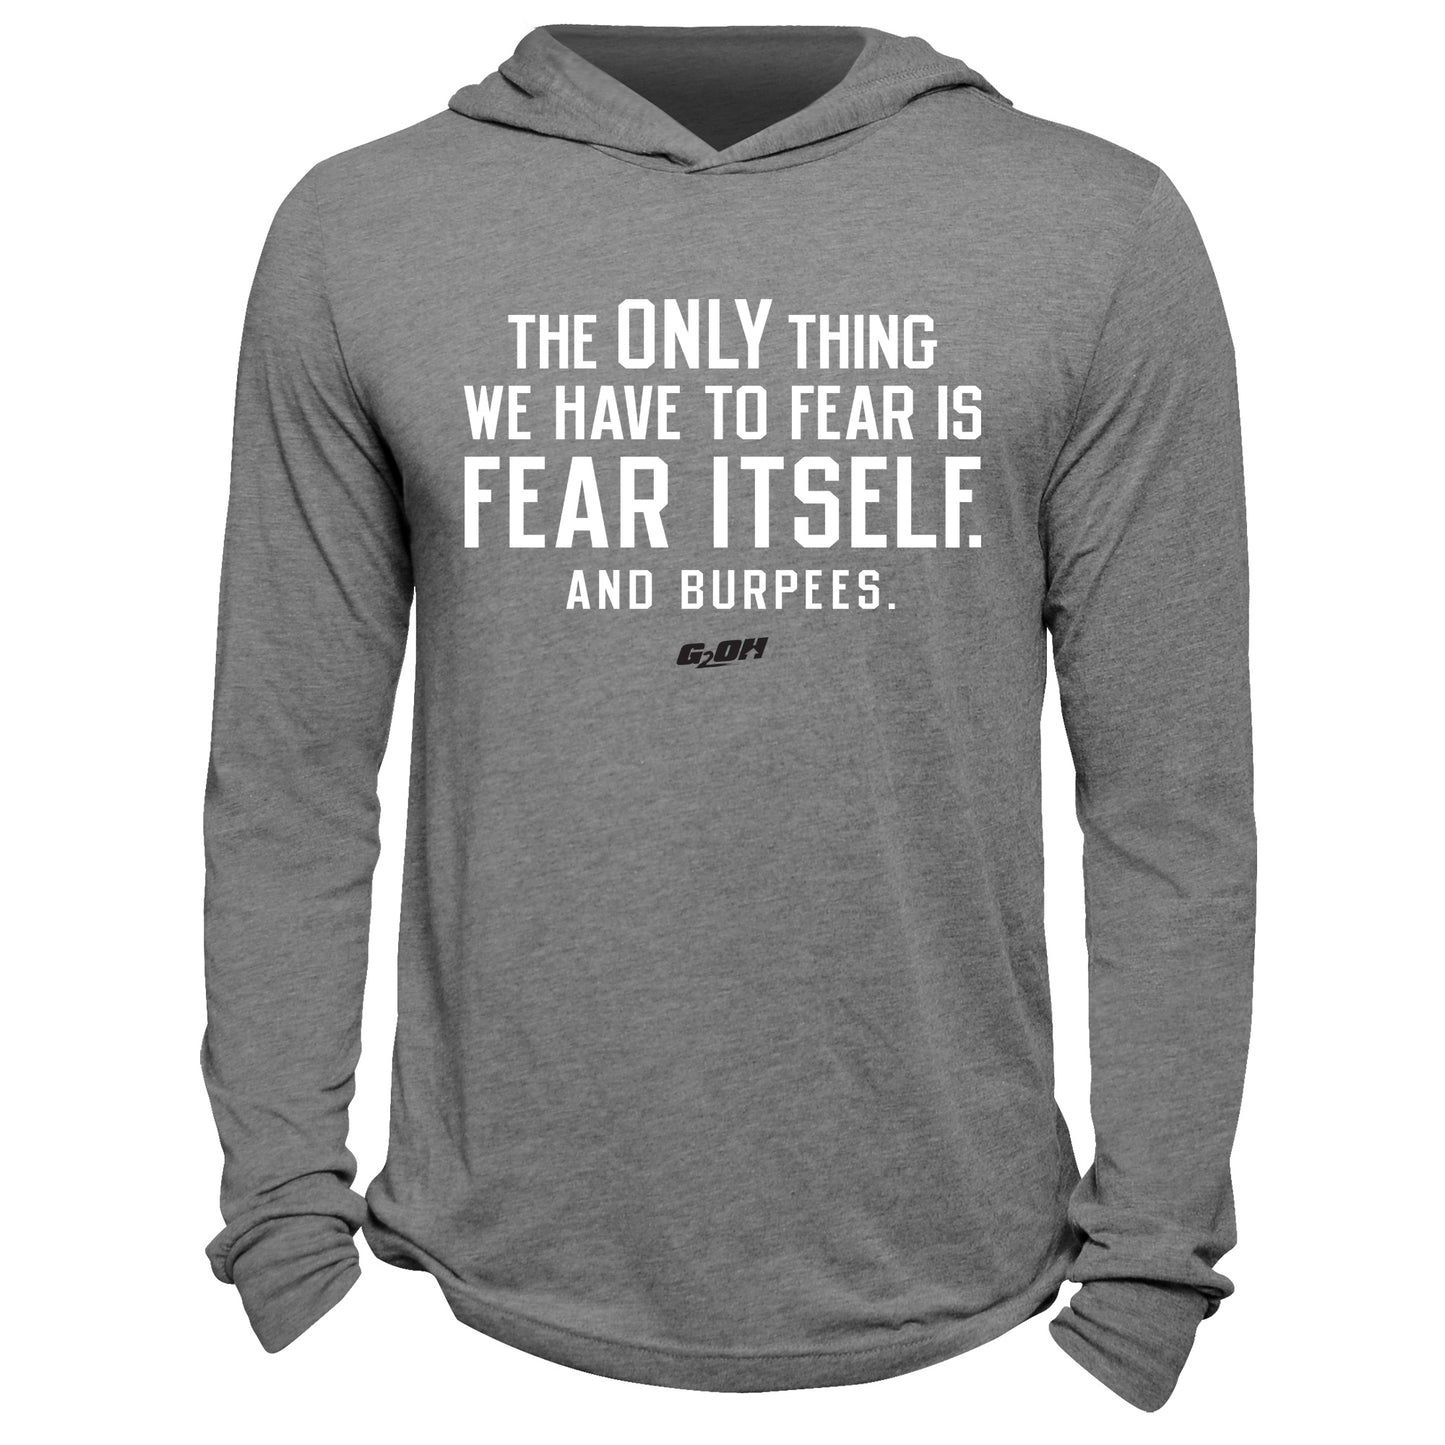 Fear Itself. And Burpees. Hoodie